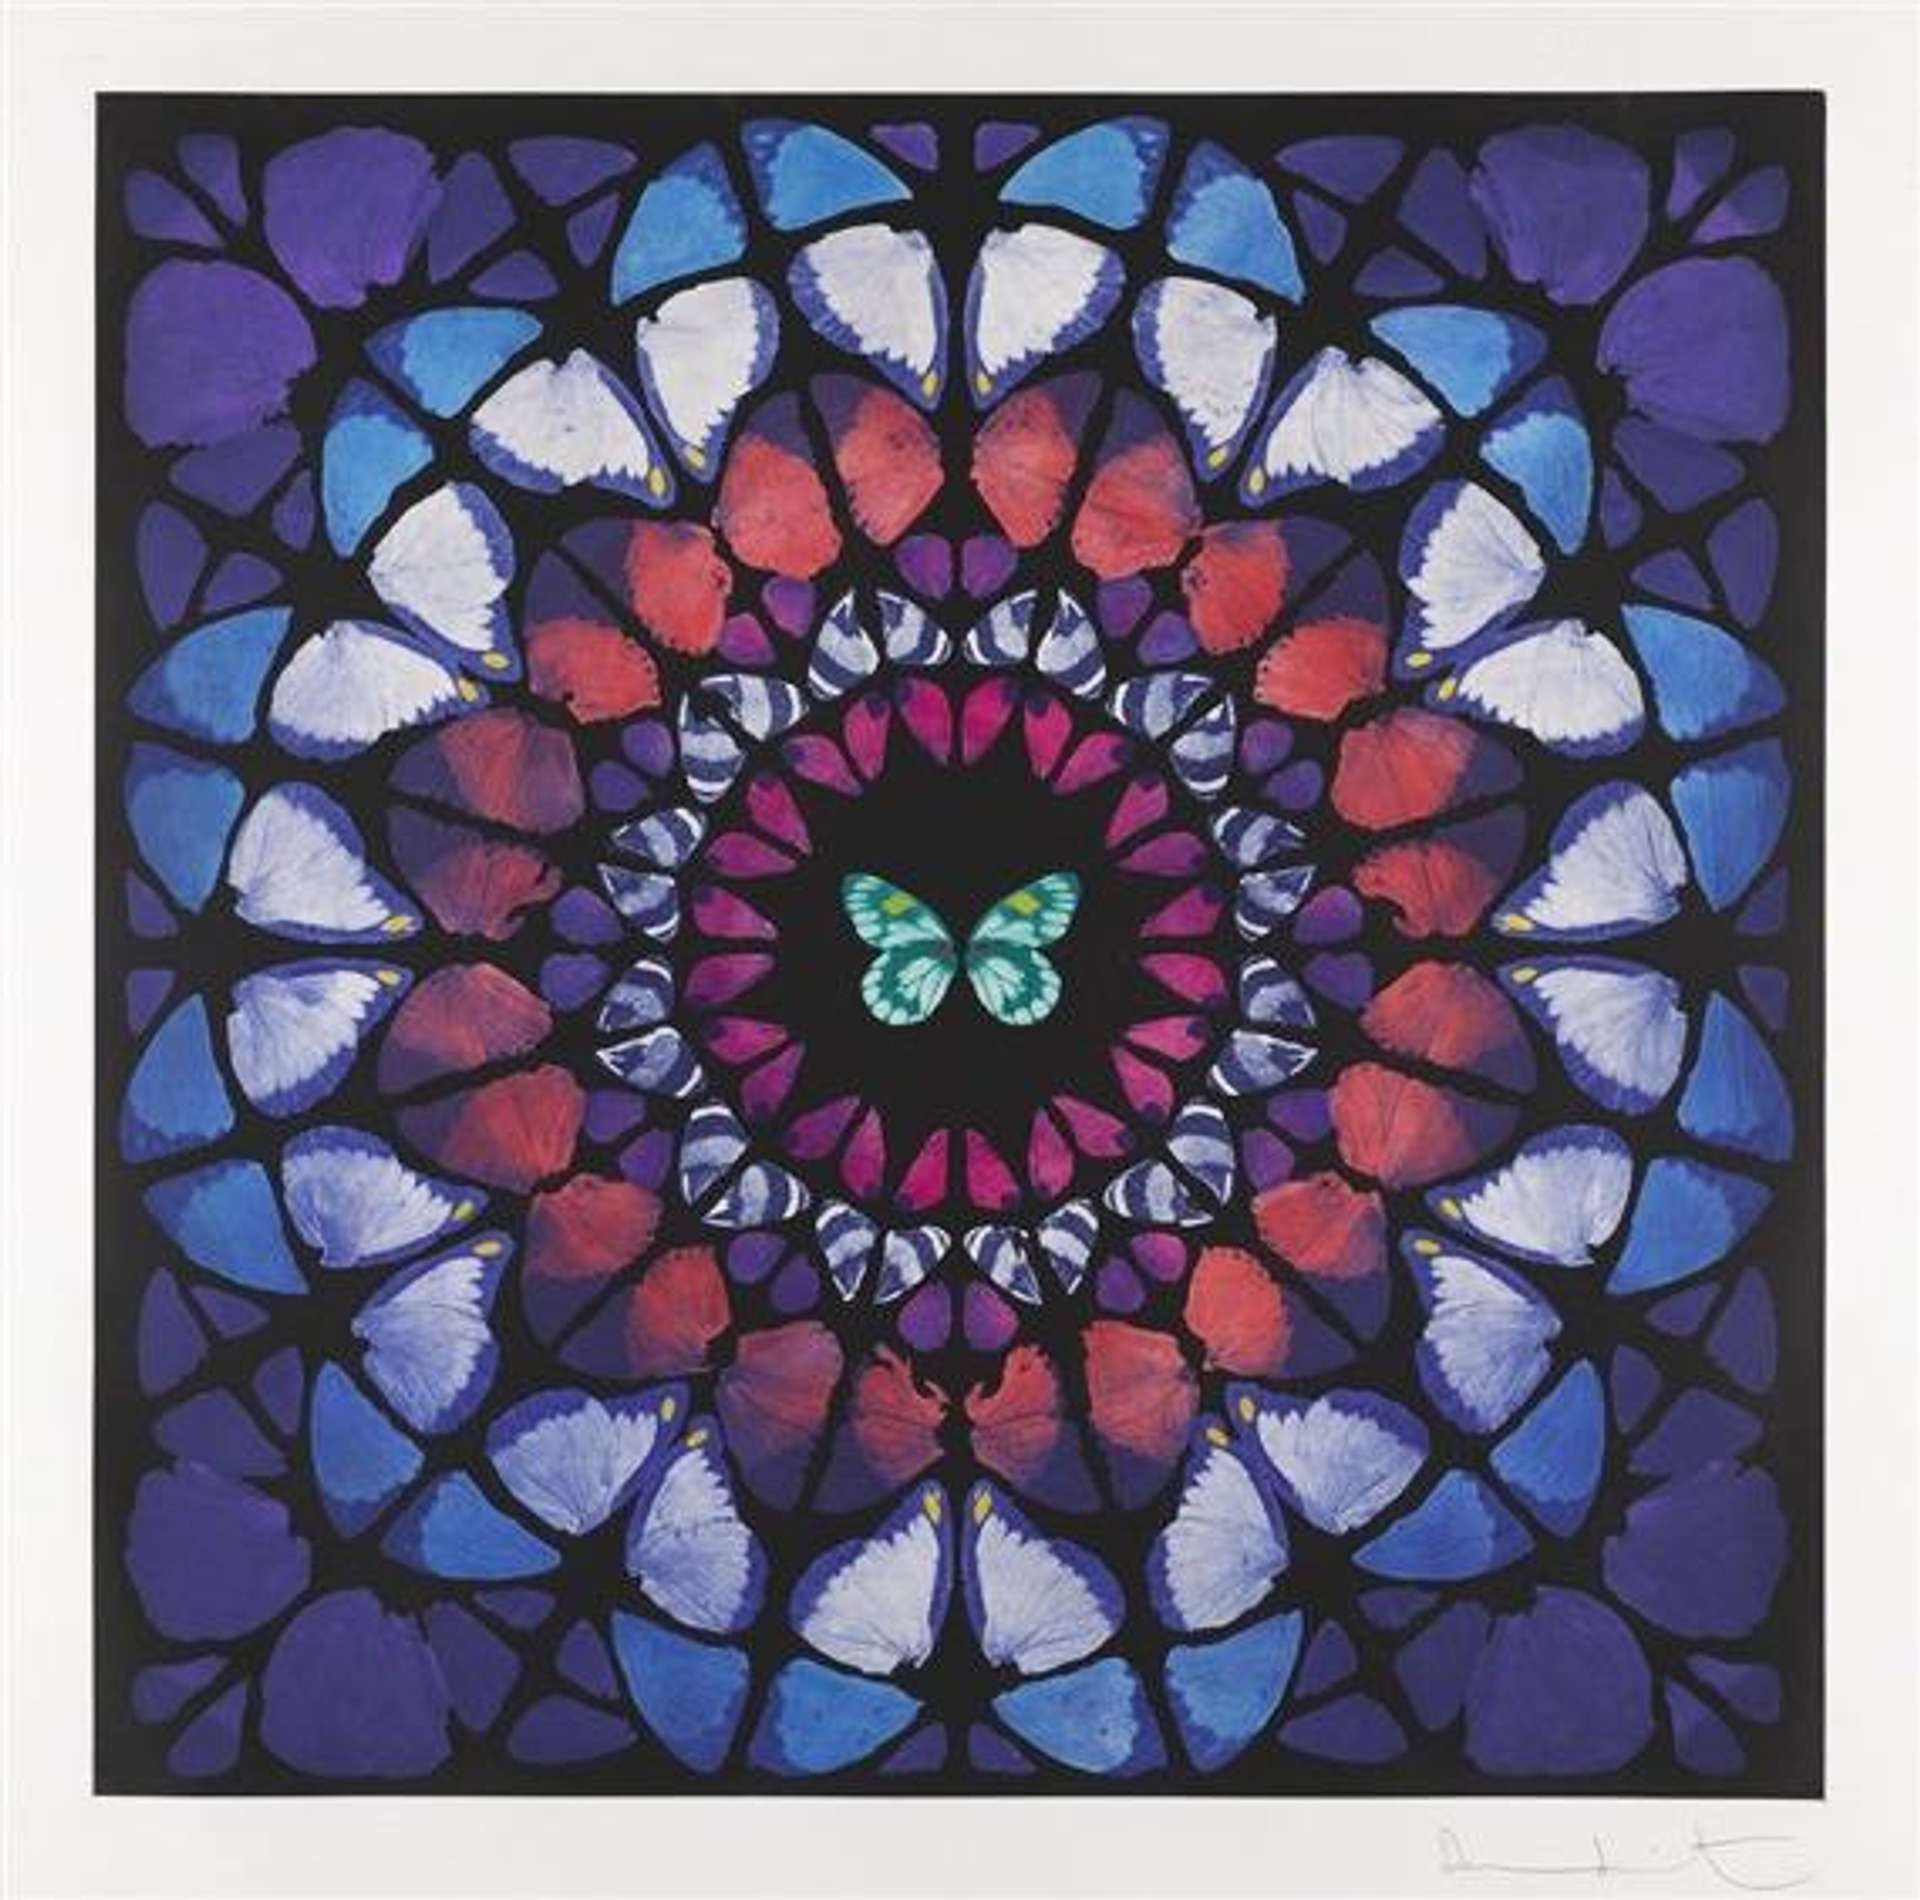 The central focus of this print is Damien Hirst’s famous butterfly motif, showing one in the middle of the composition and the intricate surrounding pattern made up of butterfly wings. Minaret is depicted in varying shades of blue and pink and is made up of concentric circles.